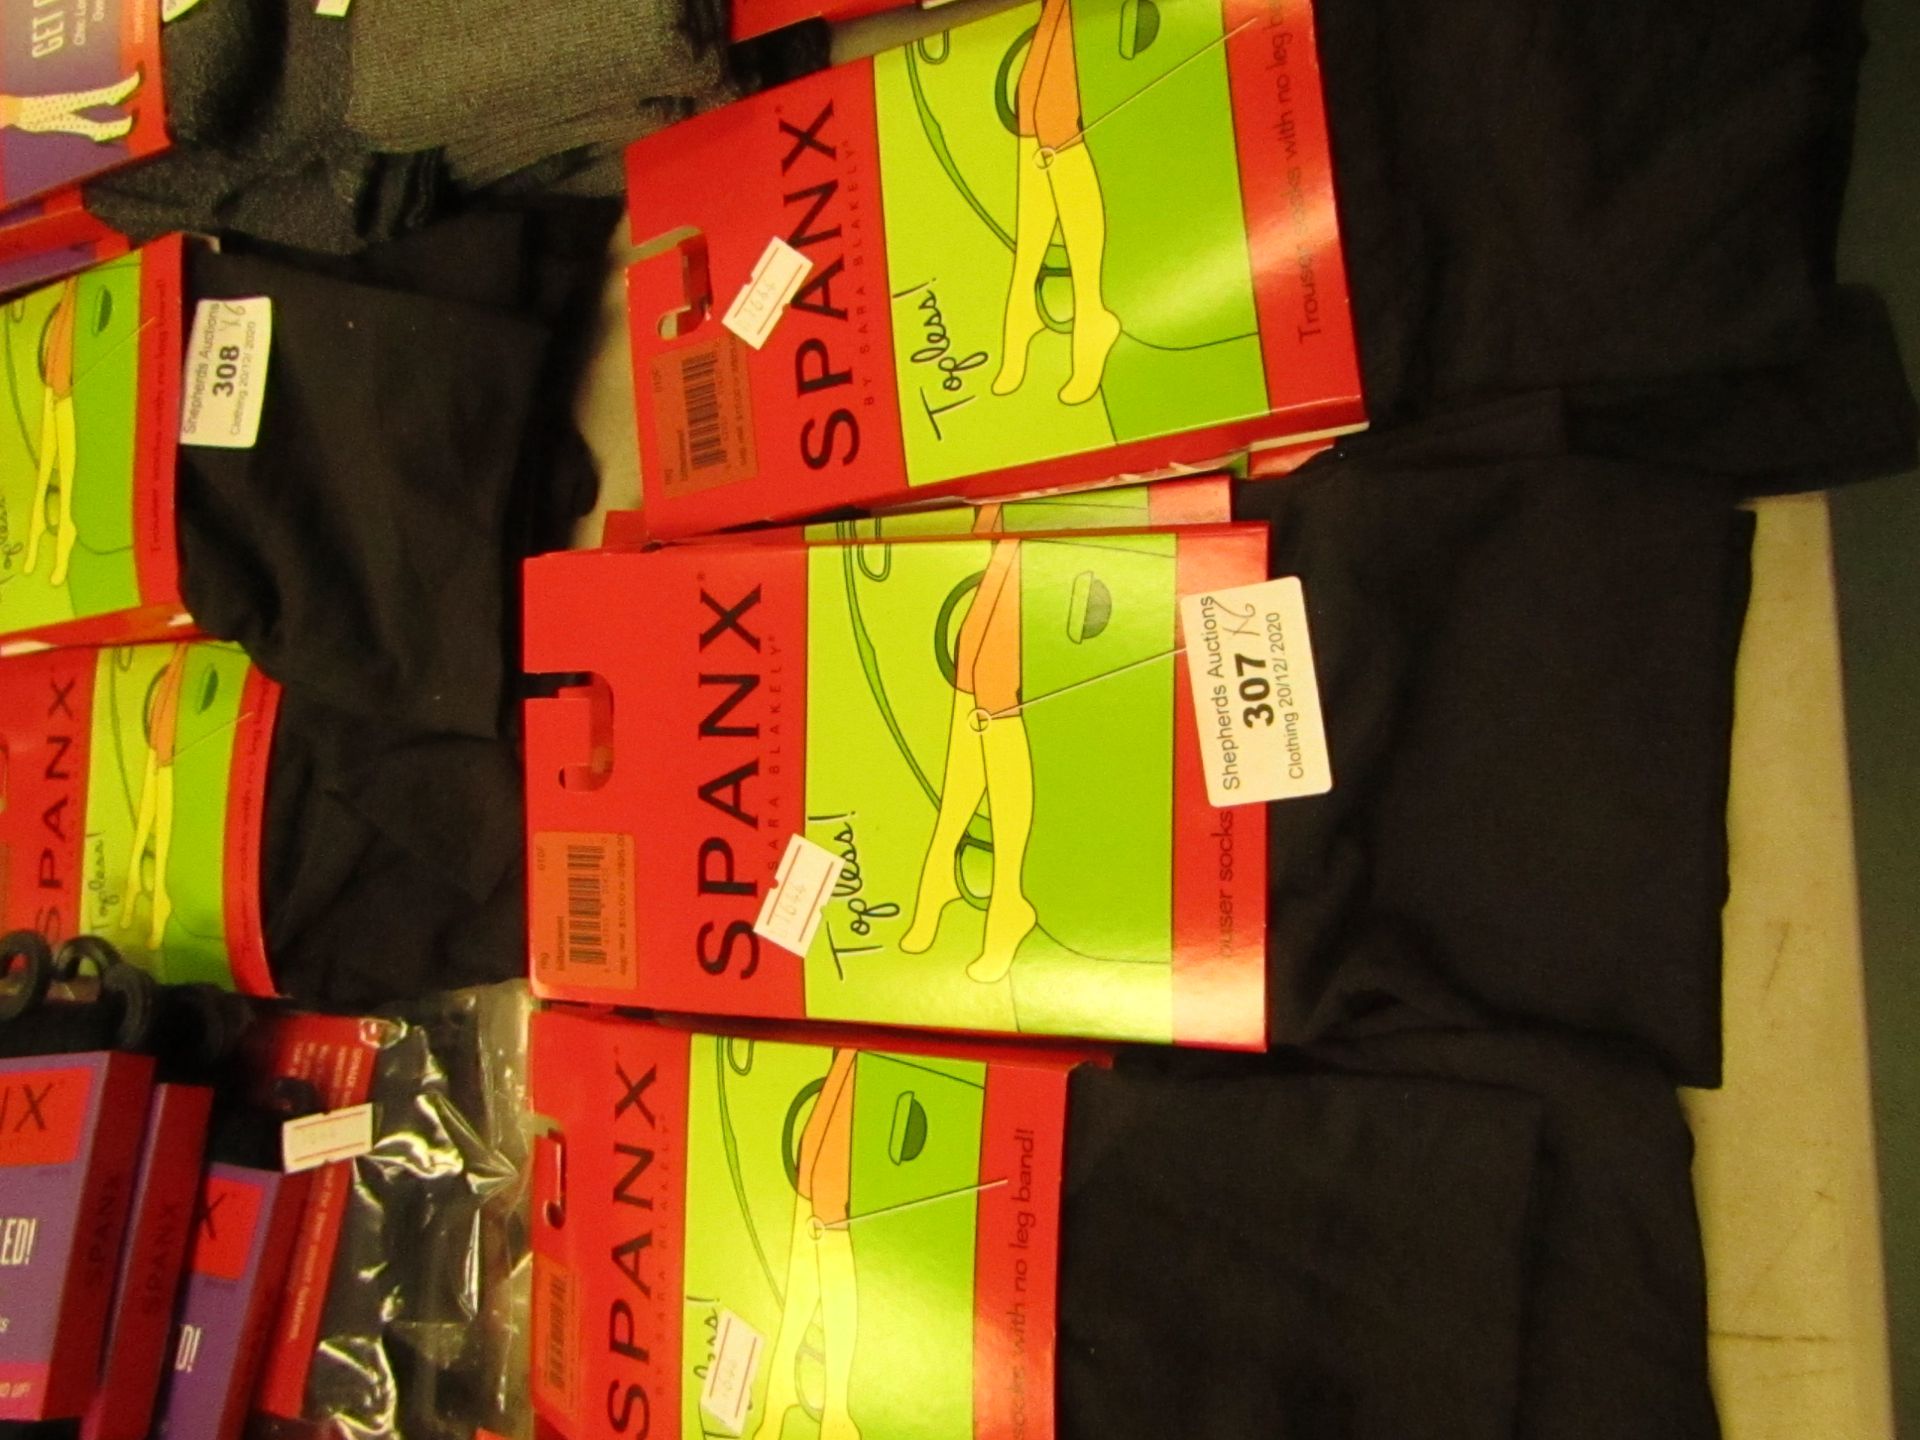 6x pairs of Spanx topless trouser socks, new, RRP £4 each pair